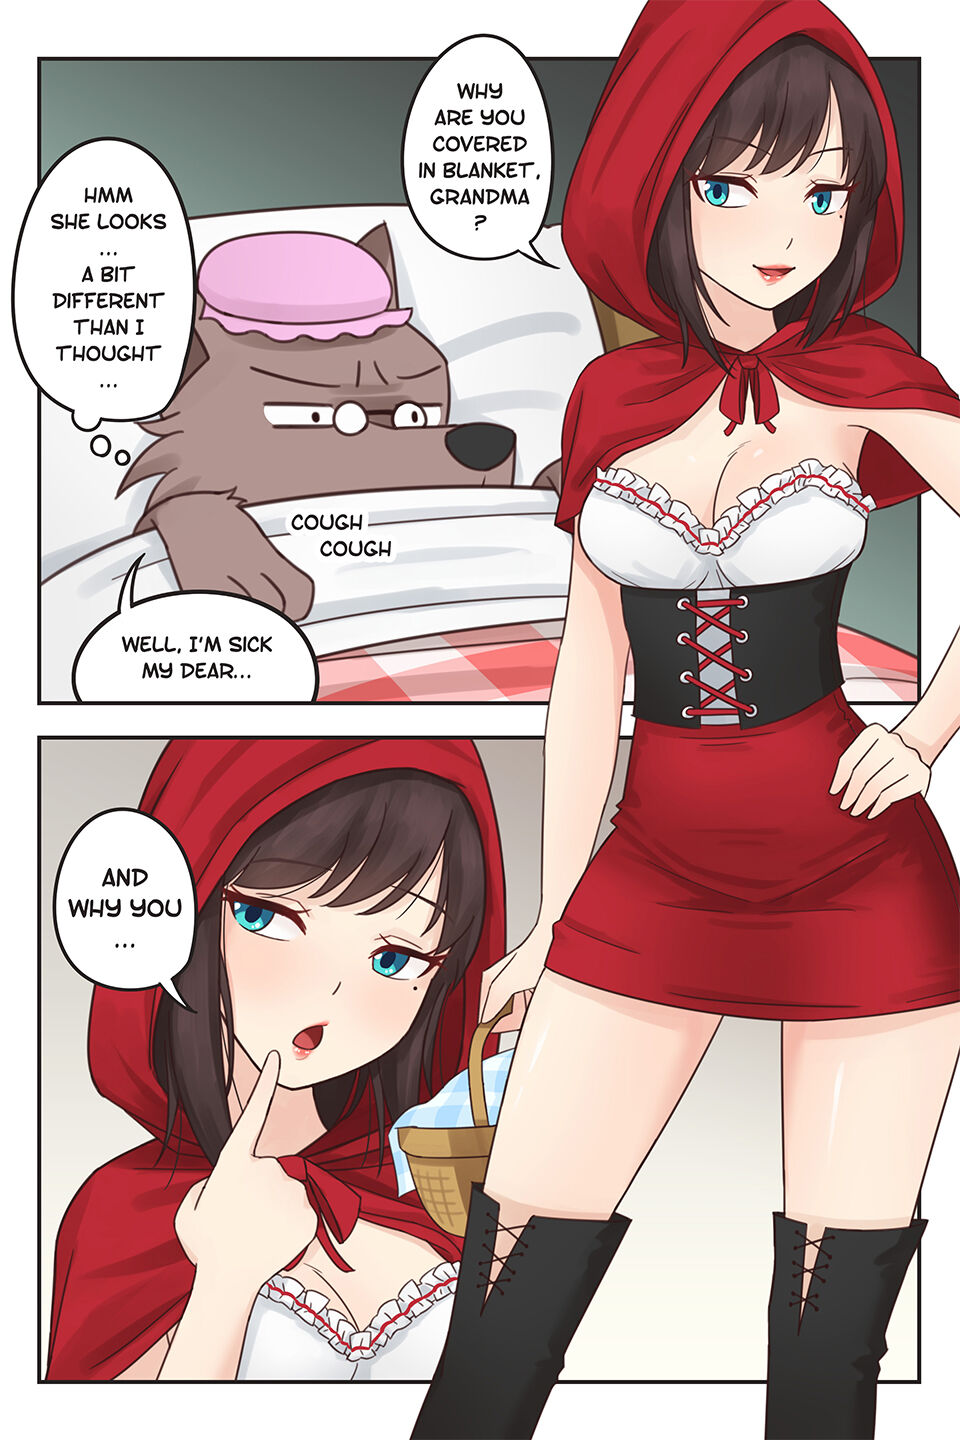 Little Red Riding Hood Porn - Little Red Riding Hood - Page 2 - HentaiRox